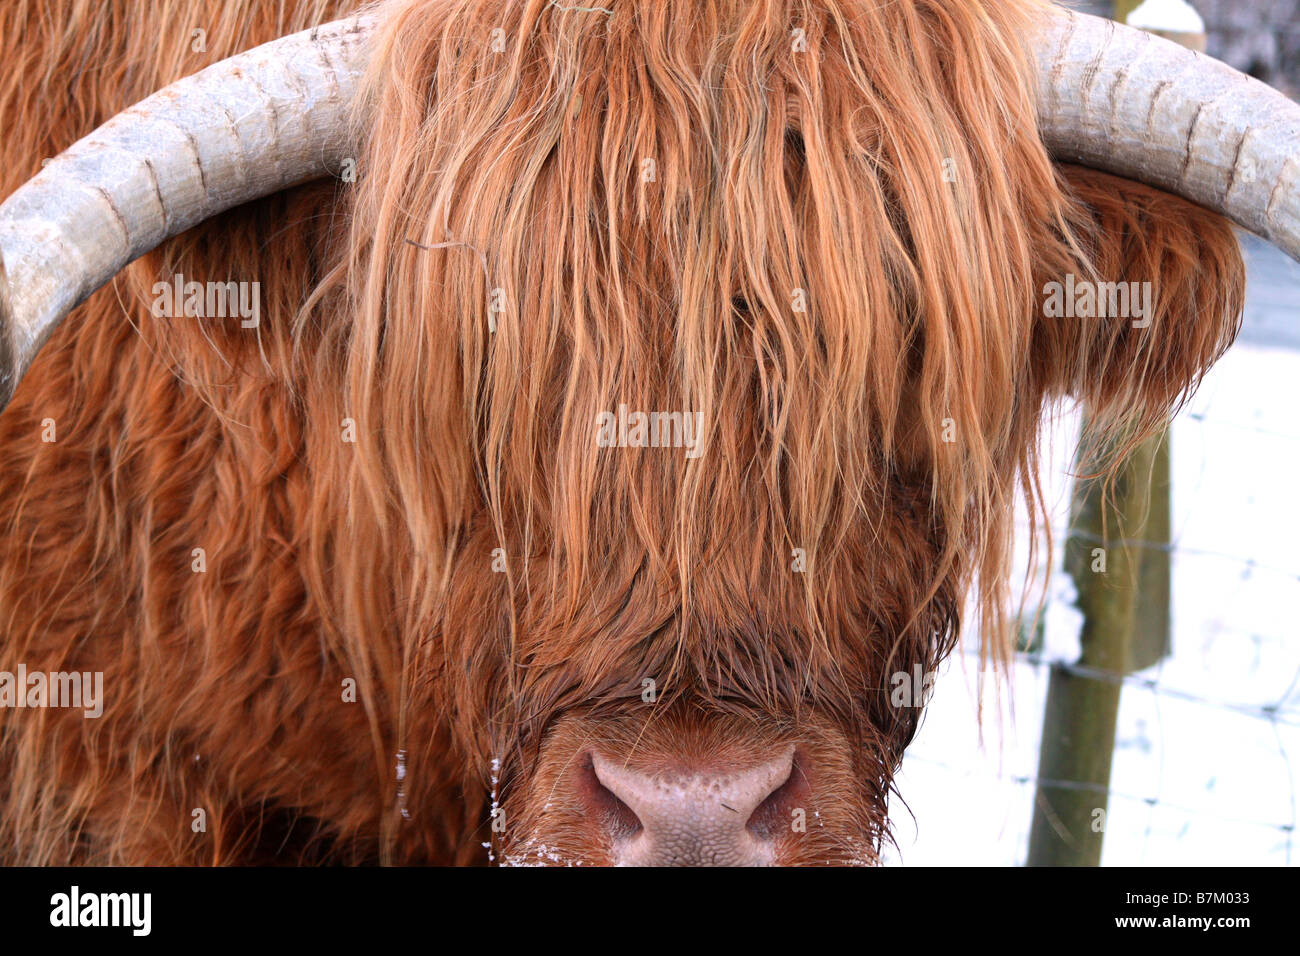 Close up Portrait of a Highland Cow. Stock Photo